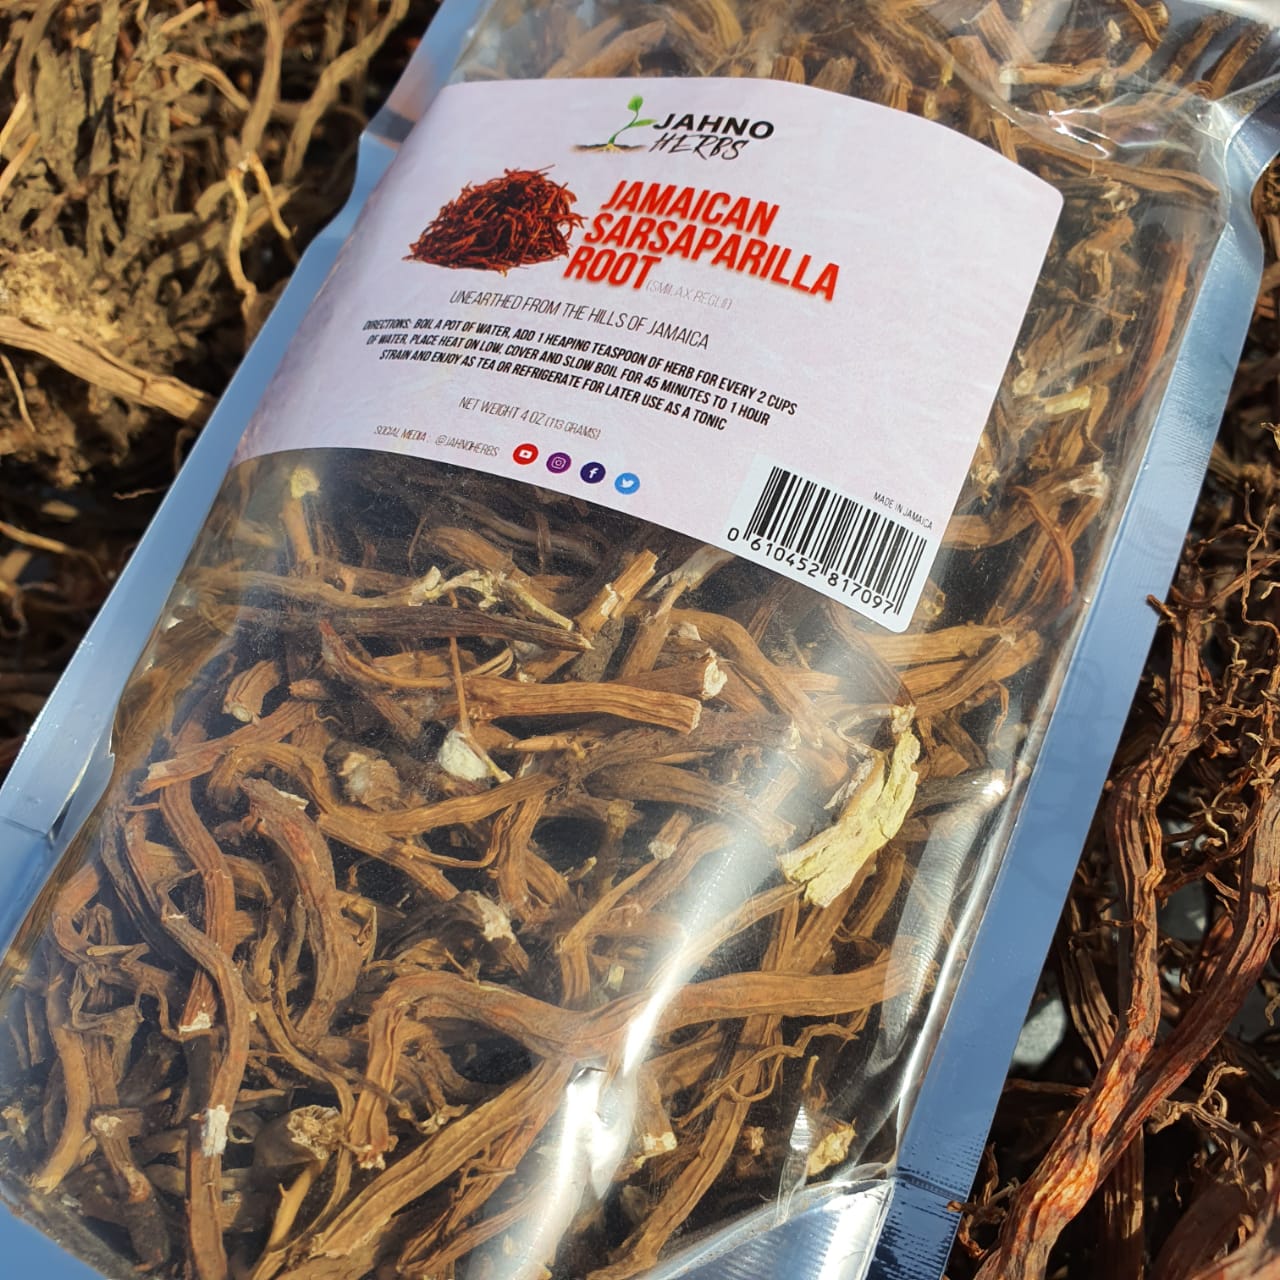 Sarsaparilla (Smilax regelii) Root, Cut and Sifted, Wild Harvested